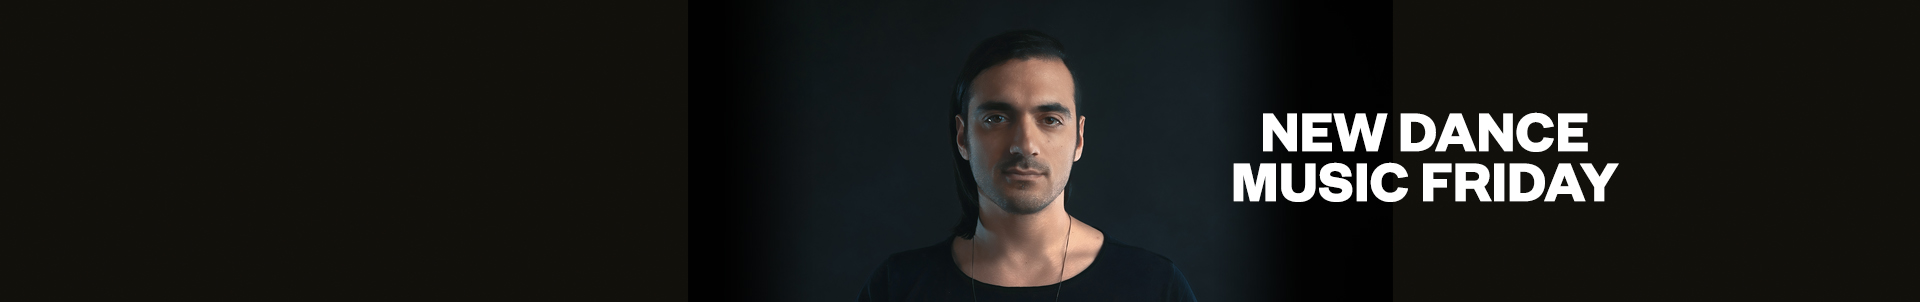 Exclusive interview: New Dance Music Friday with Ummet Ozcan